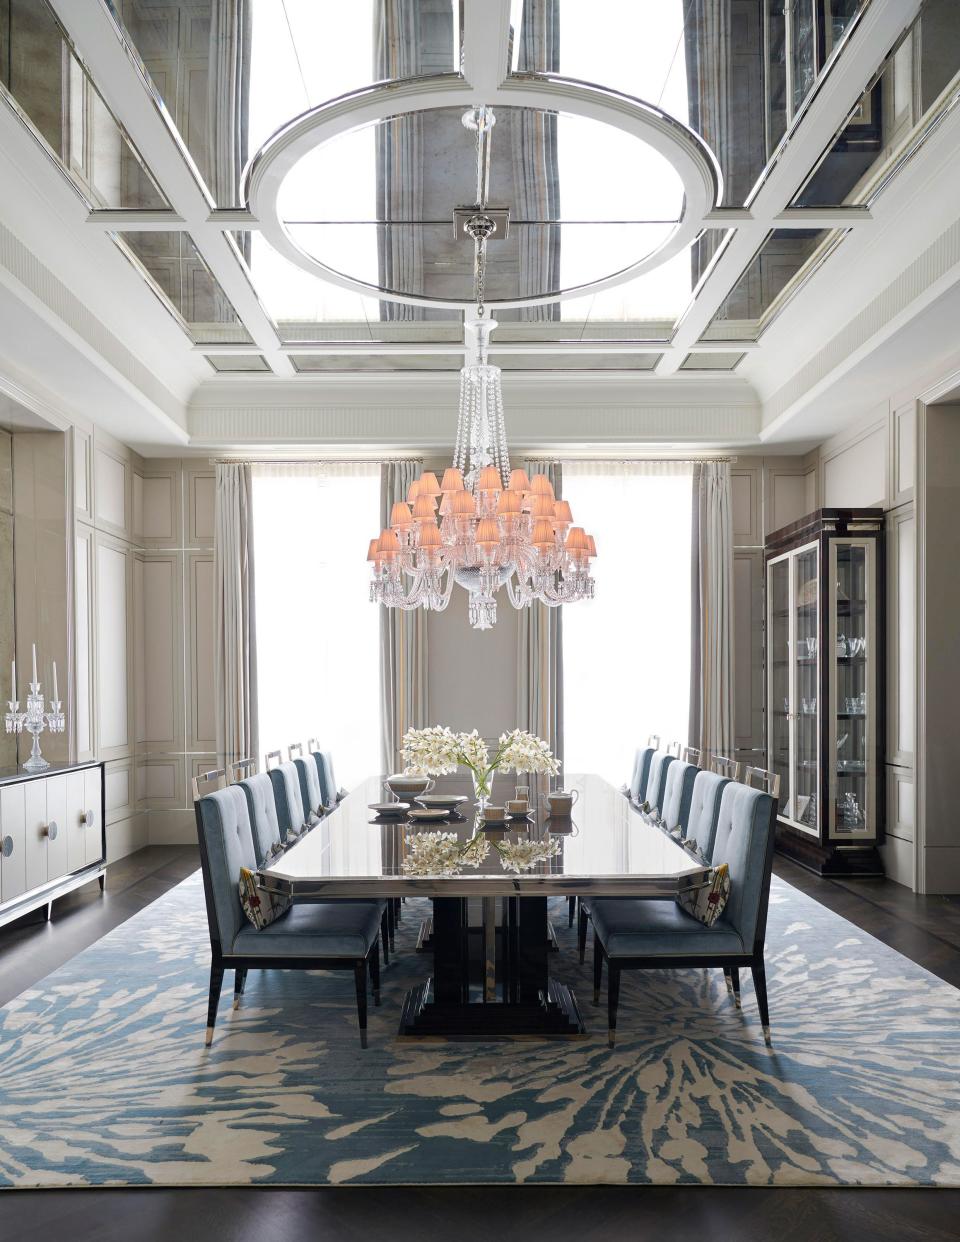 In the dining room, a 12-person table is surrounded by velvet chairs, all by Rafauli. Baccarat chandelier.